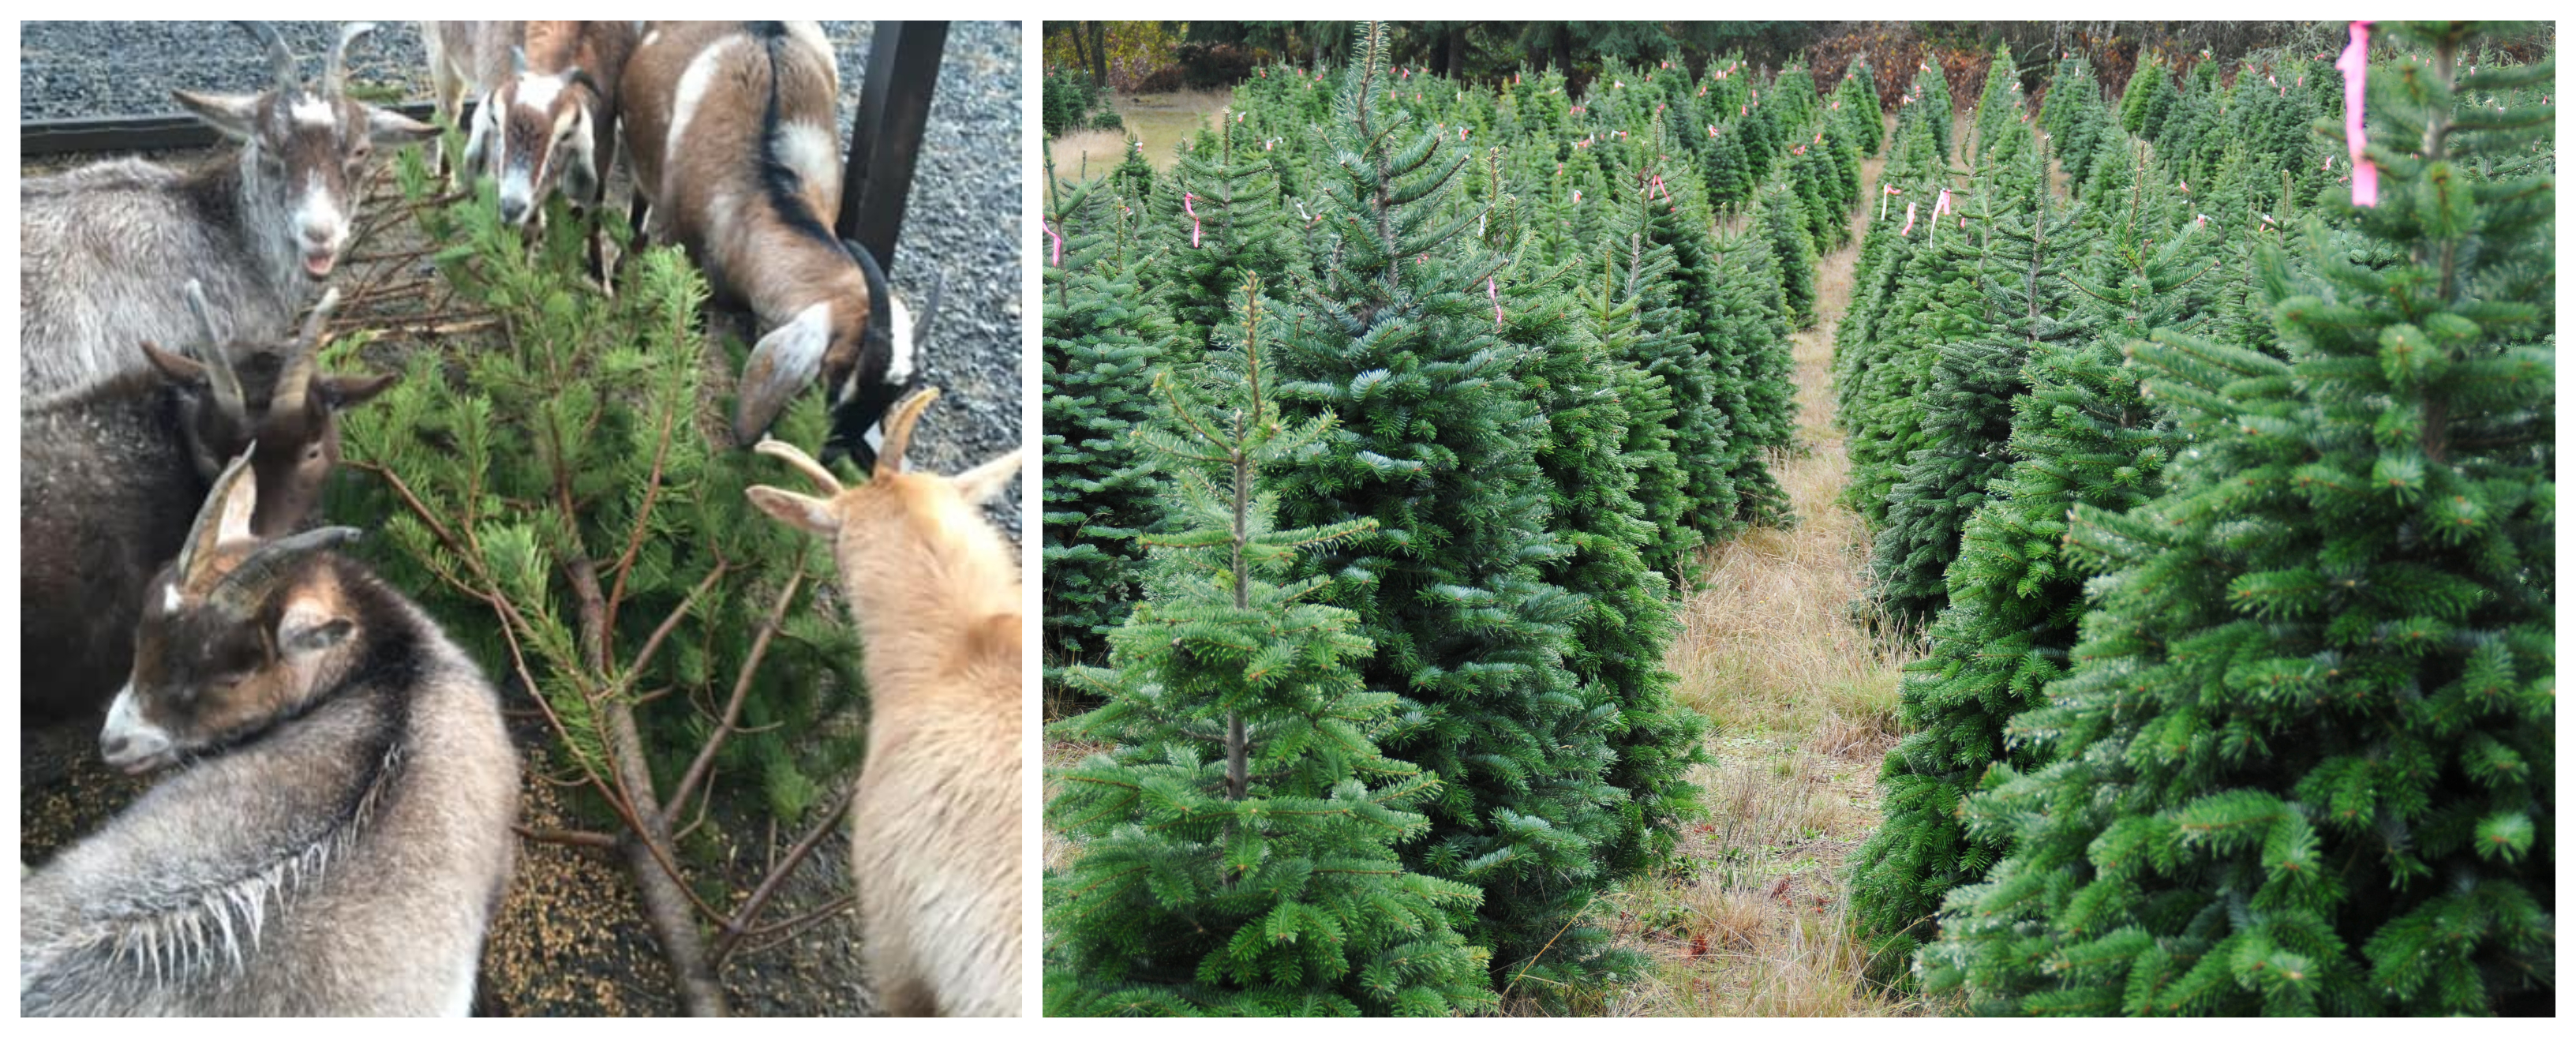 An appeal has been lodged to find a better use than the landfill for unwanted Christmas trees